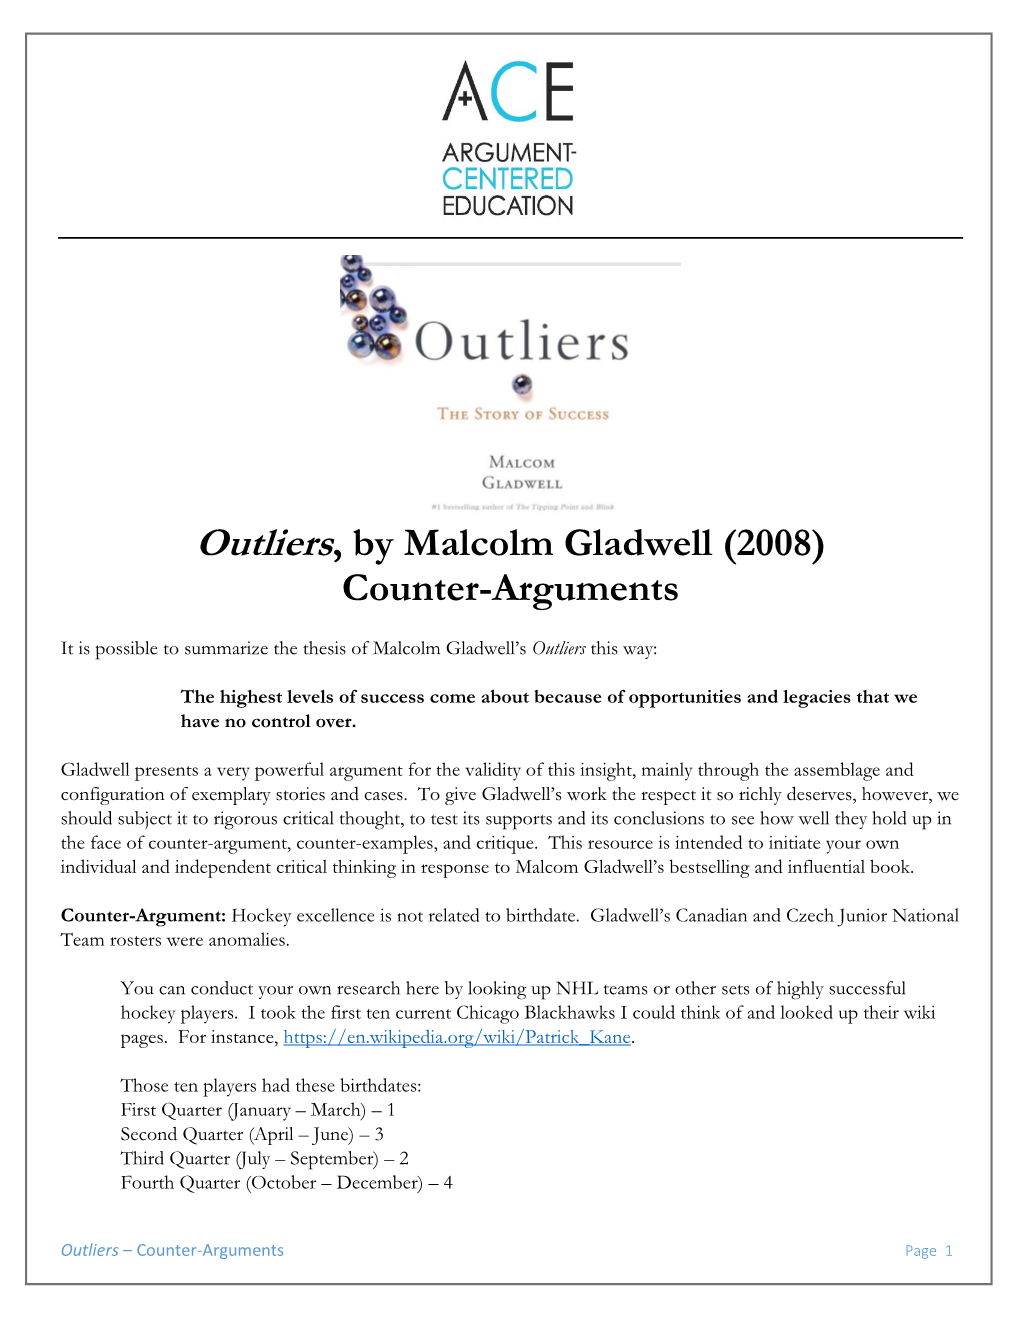 Outliers, by Malcolm Gladwell (2008) Counter-Arguments